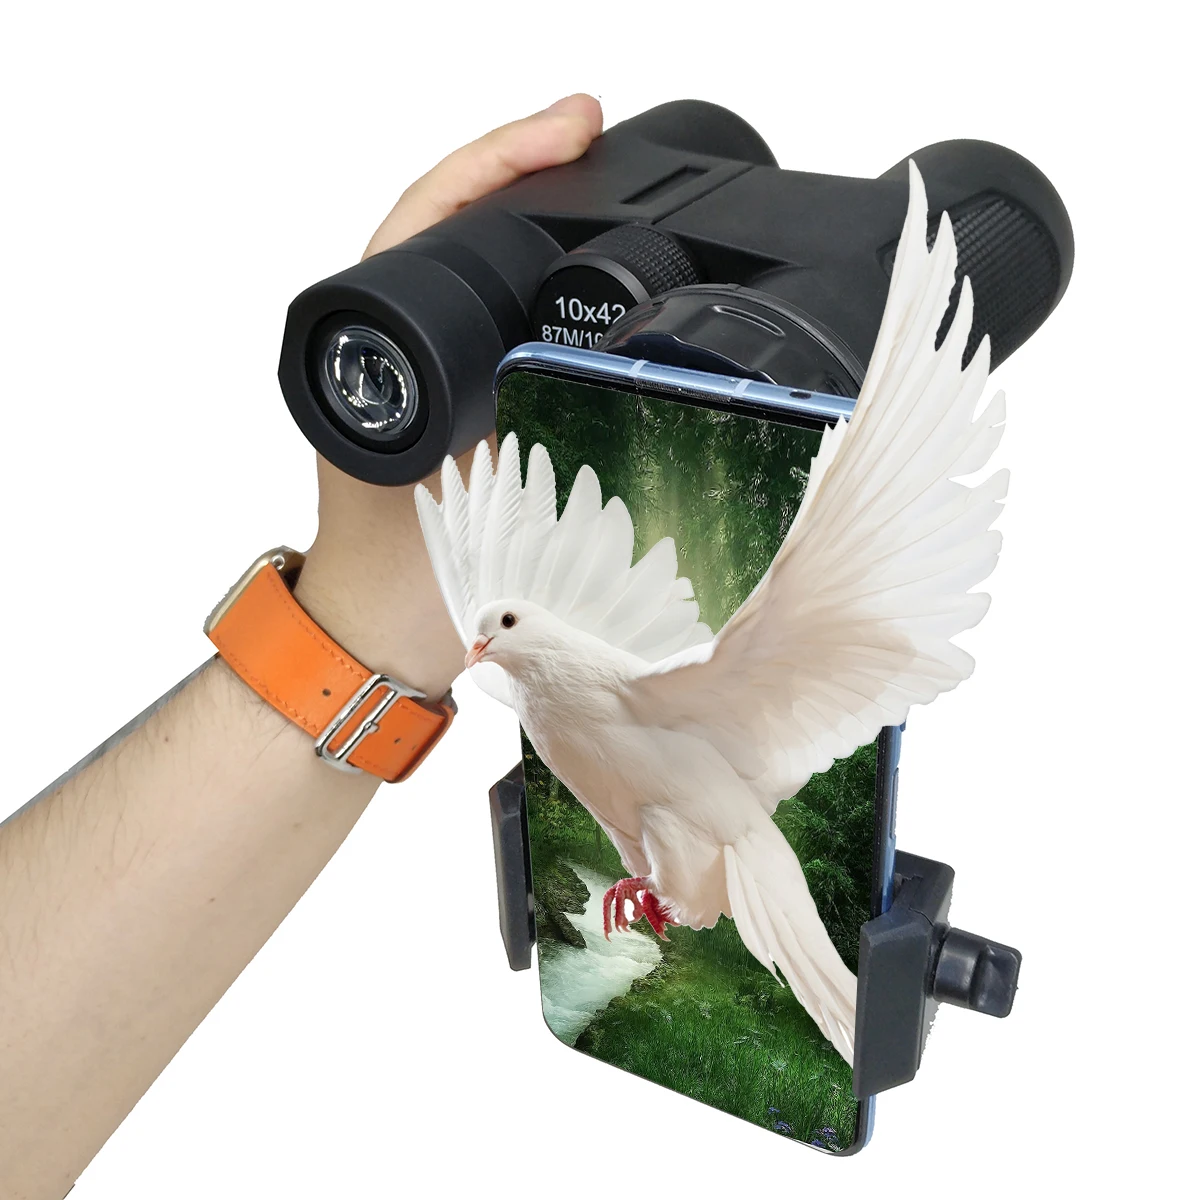 10x42 Binoculars for Adults BAK4 Prism FMC Lens Optics with Low Night Vision for Bird Watching